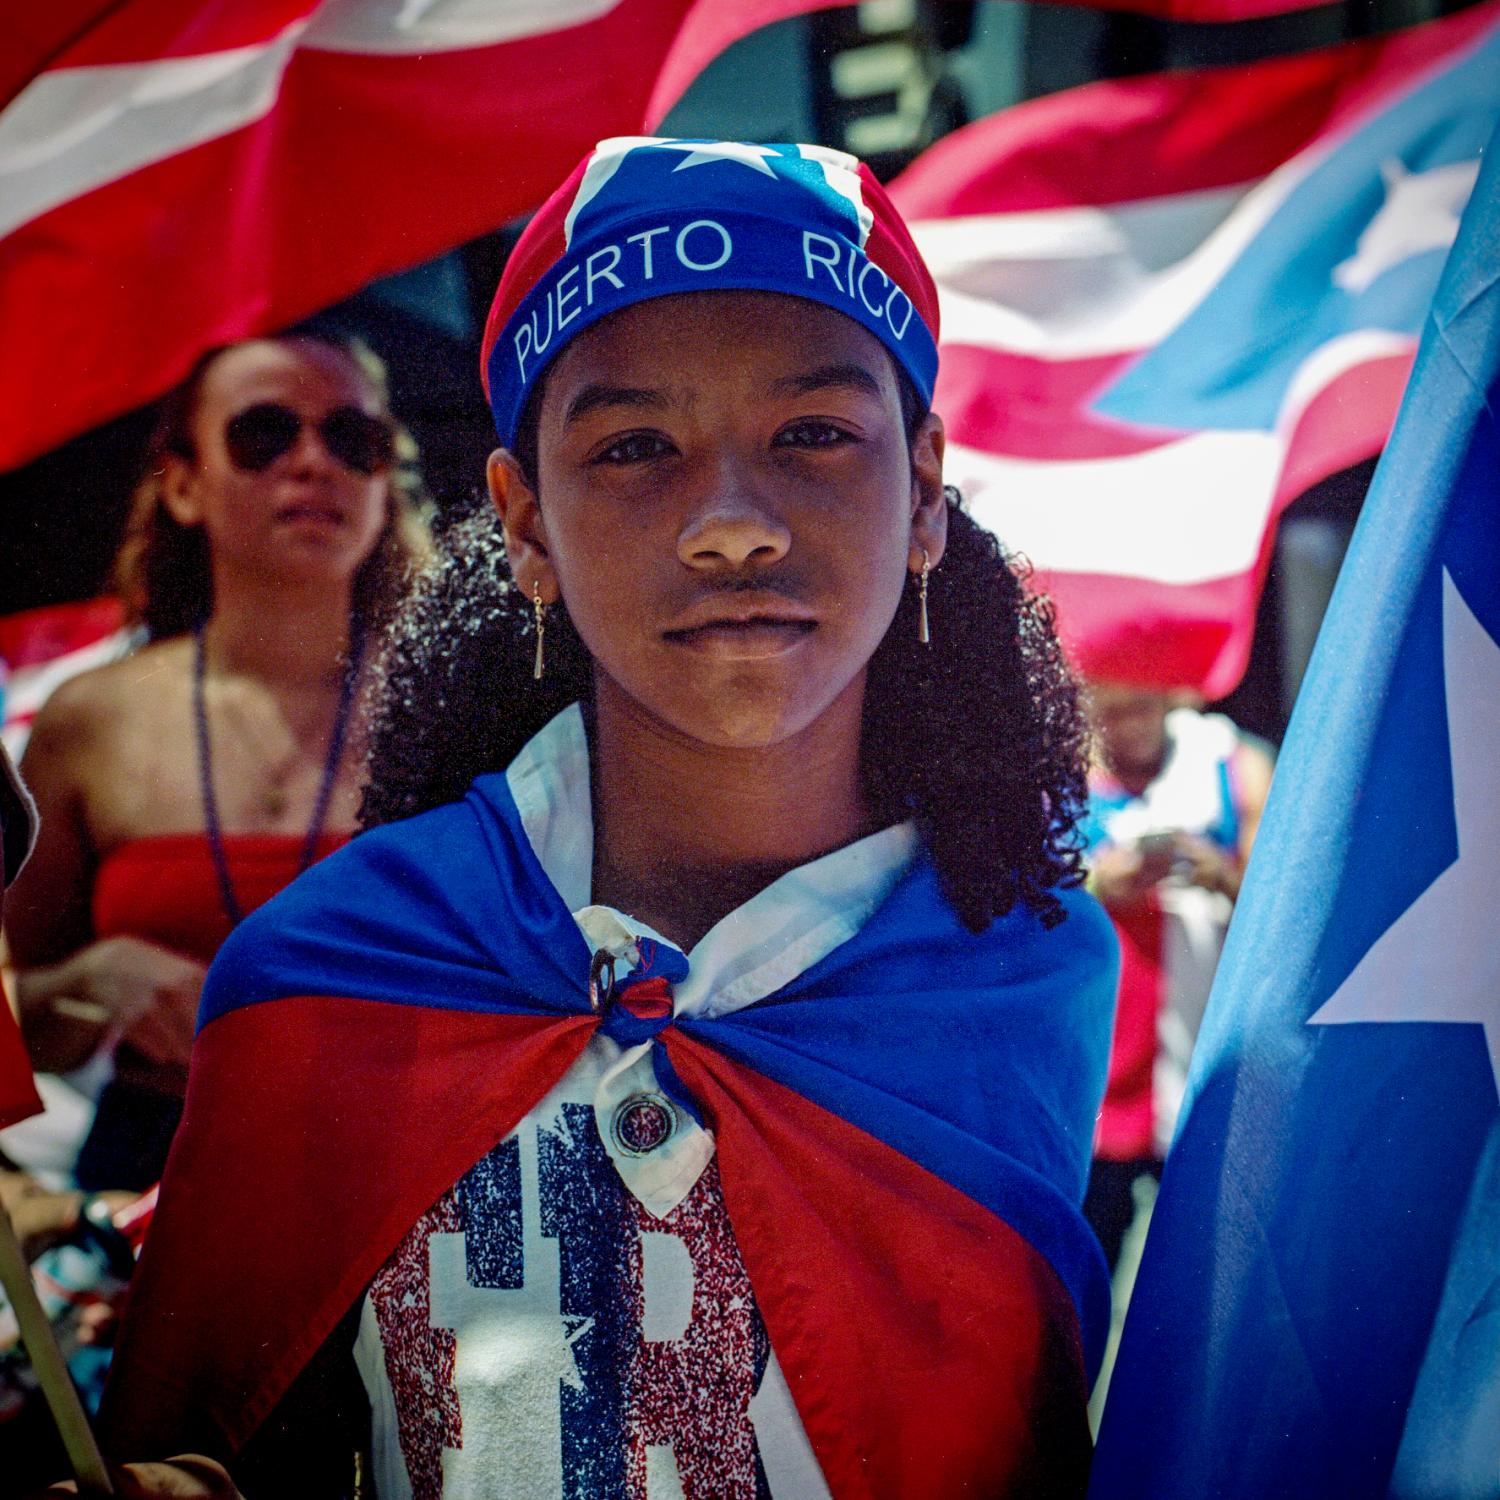 Faces of New York City  - Untitled, Puerto Rican Day Parade, 2019.